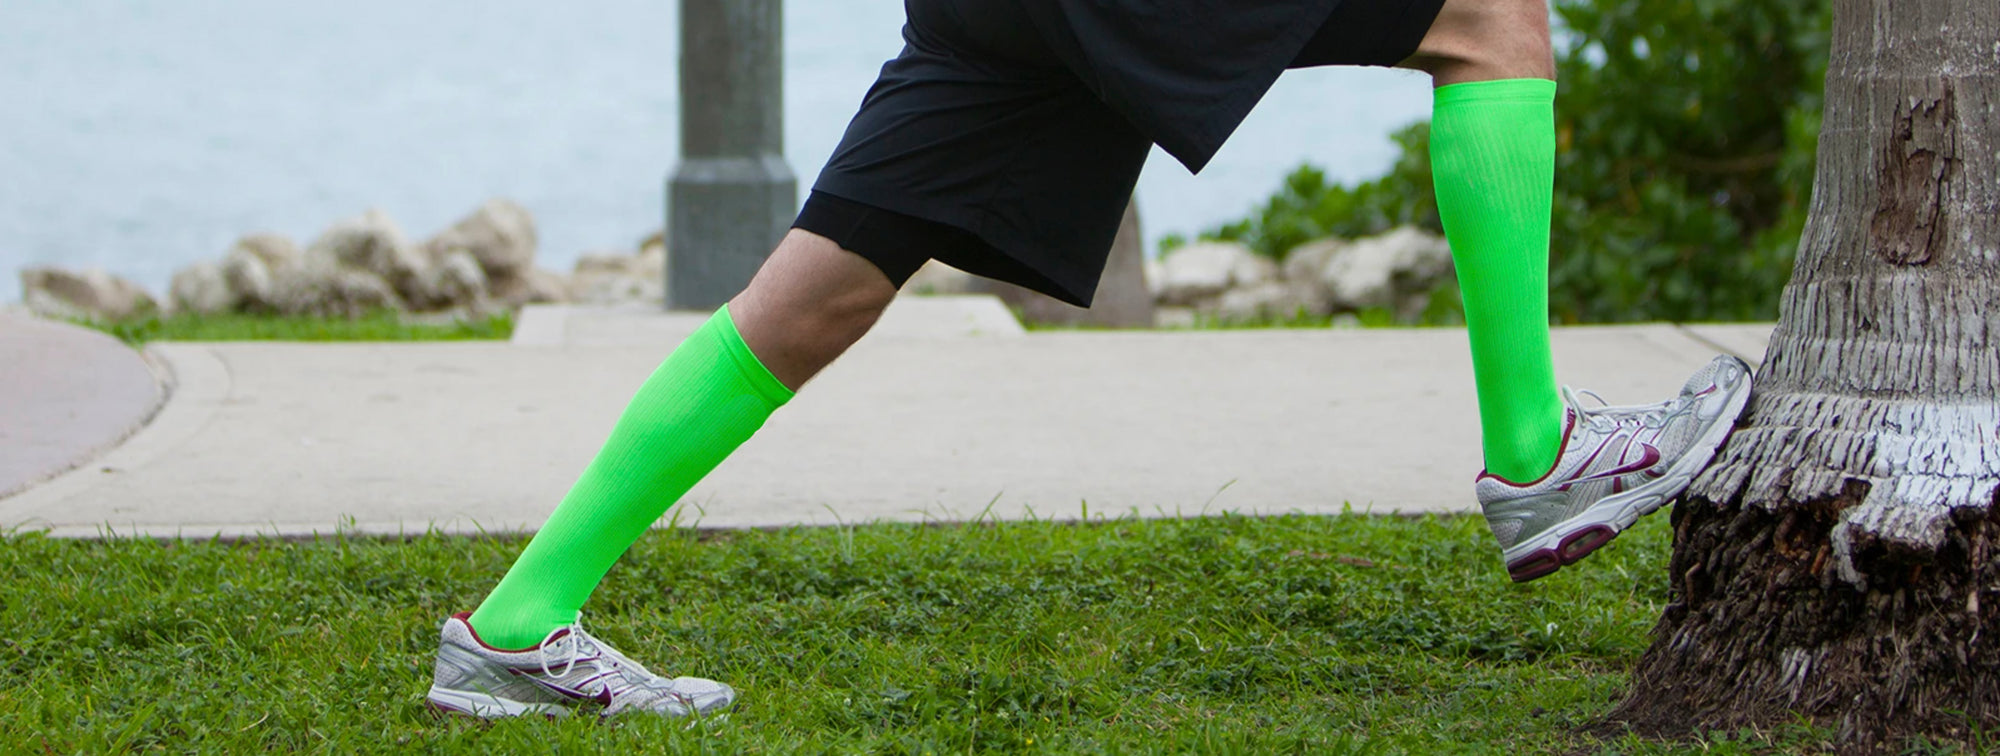 Our Q and A About Compression Socks and Compression Technology